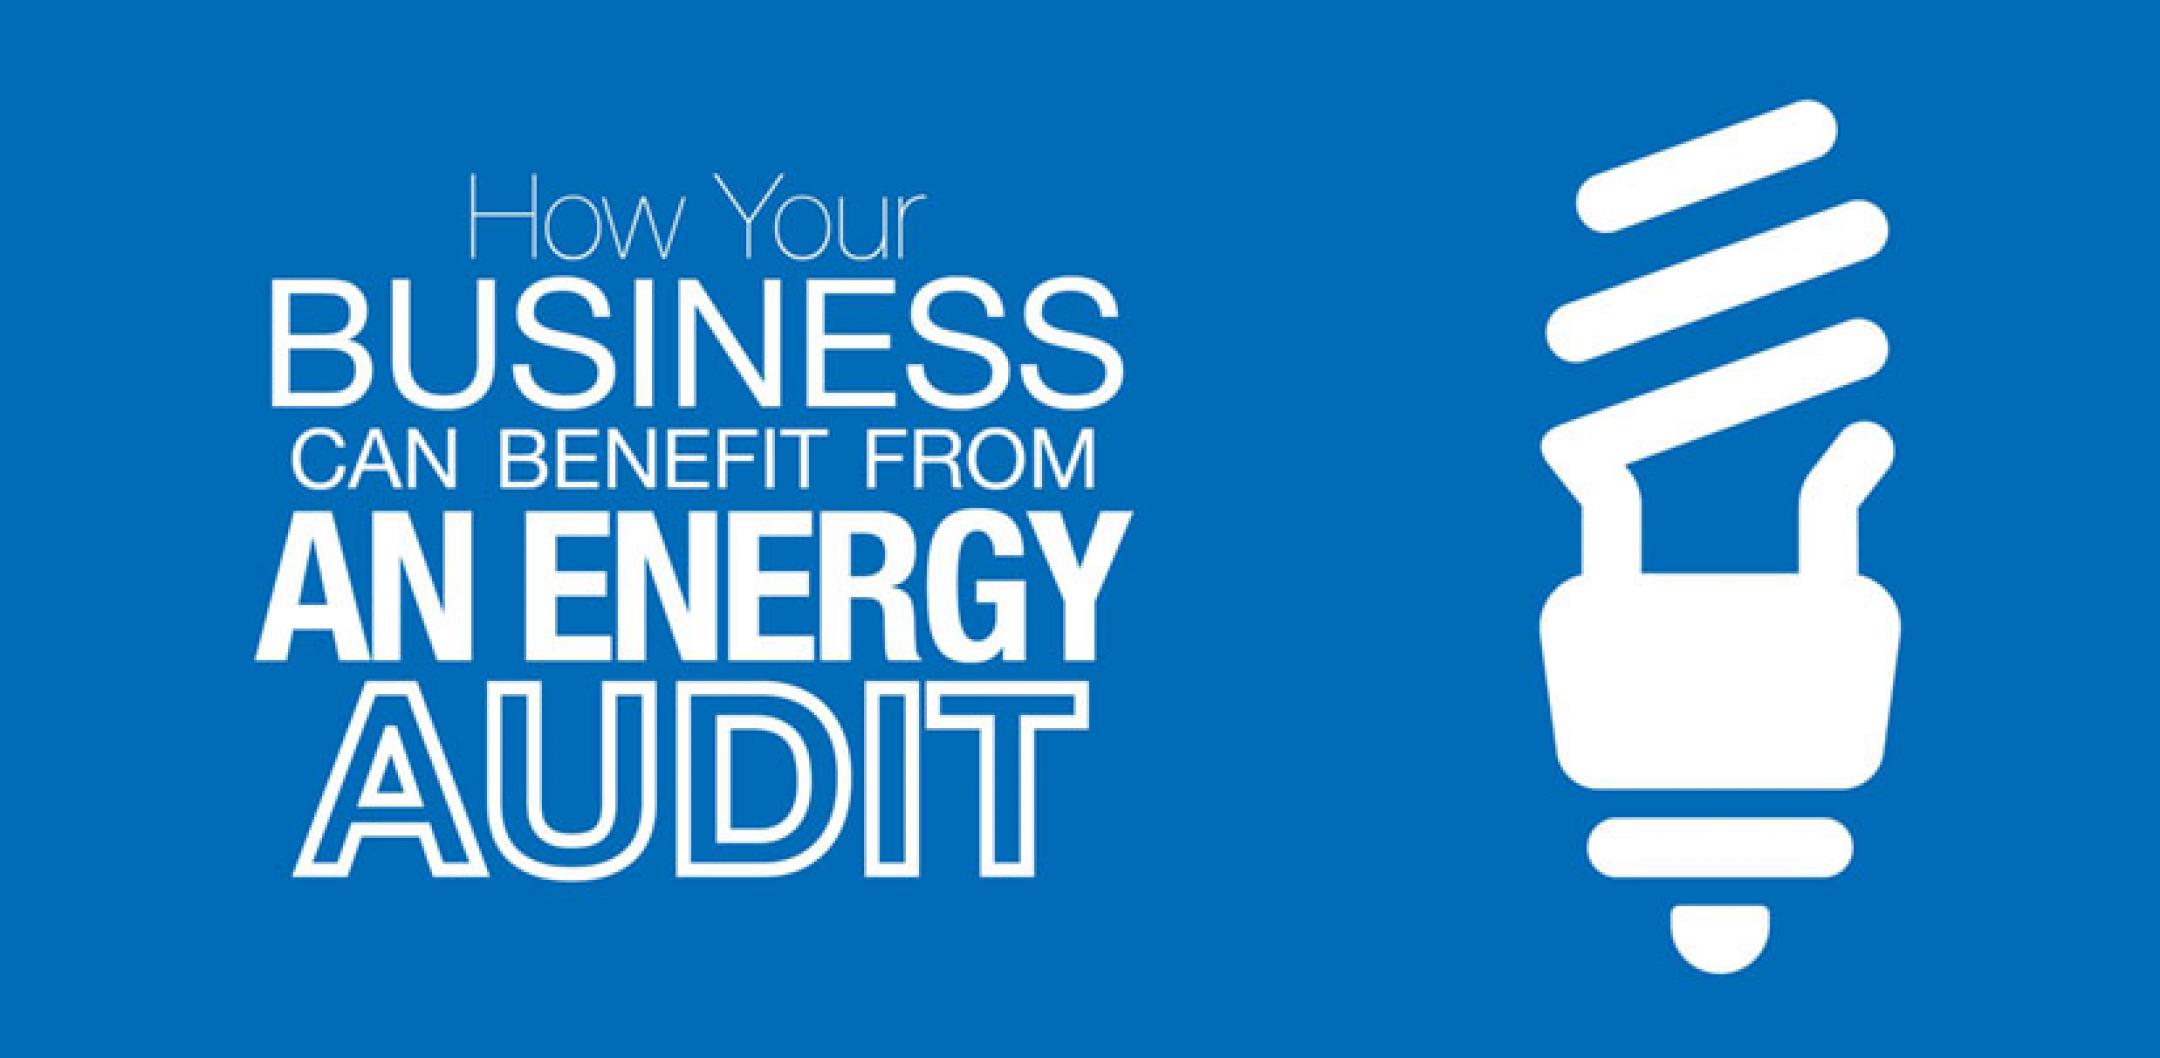 Energy Audit Benefits for Businesses